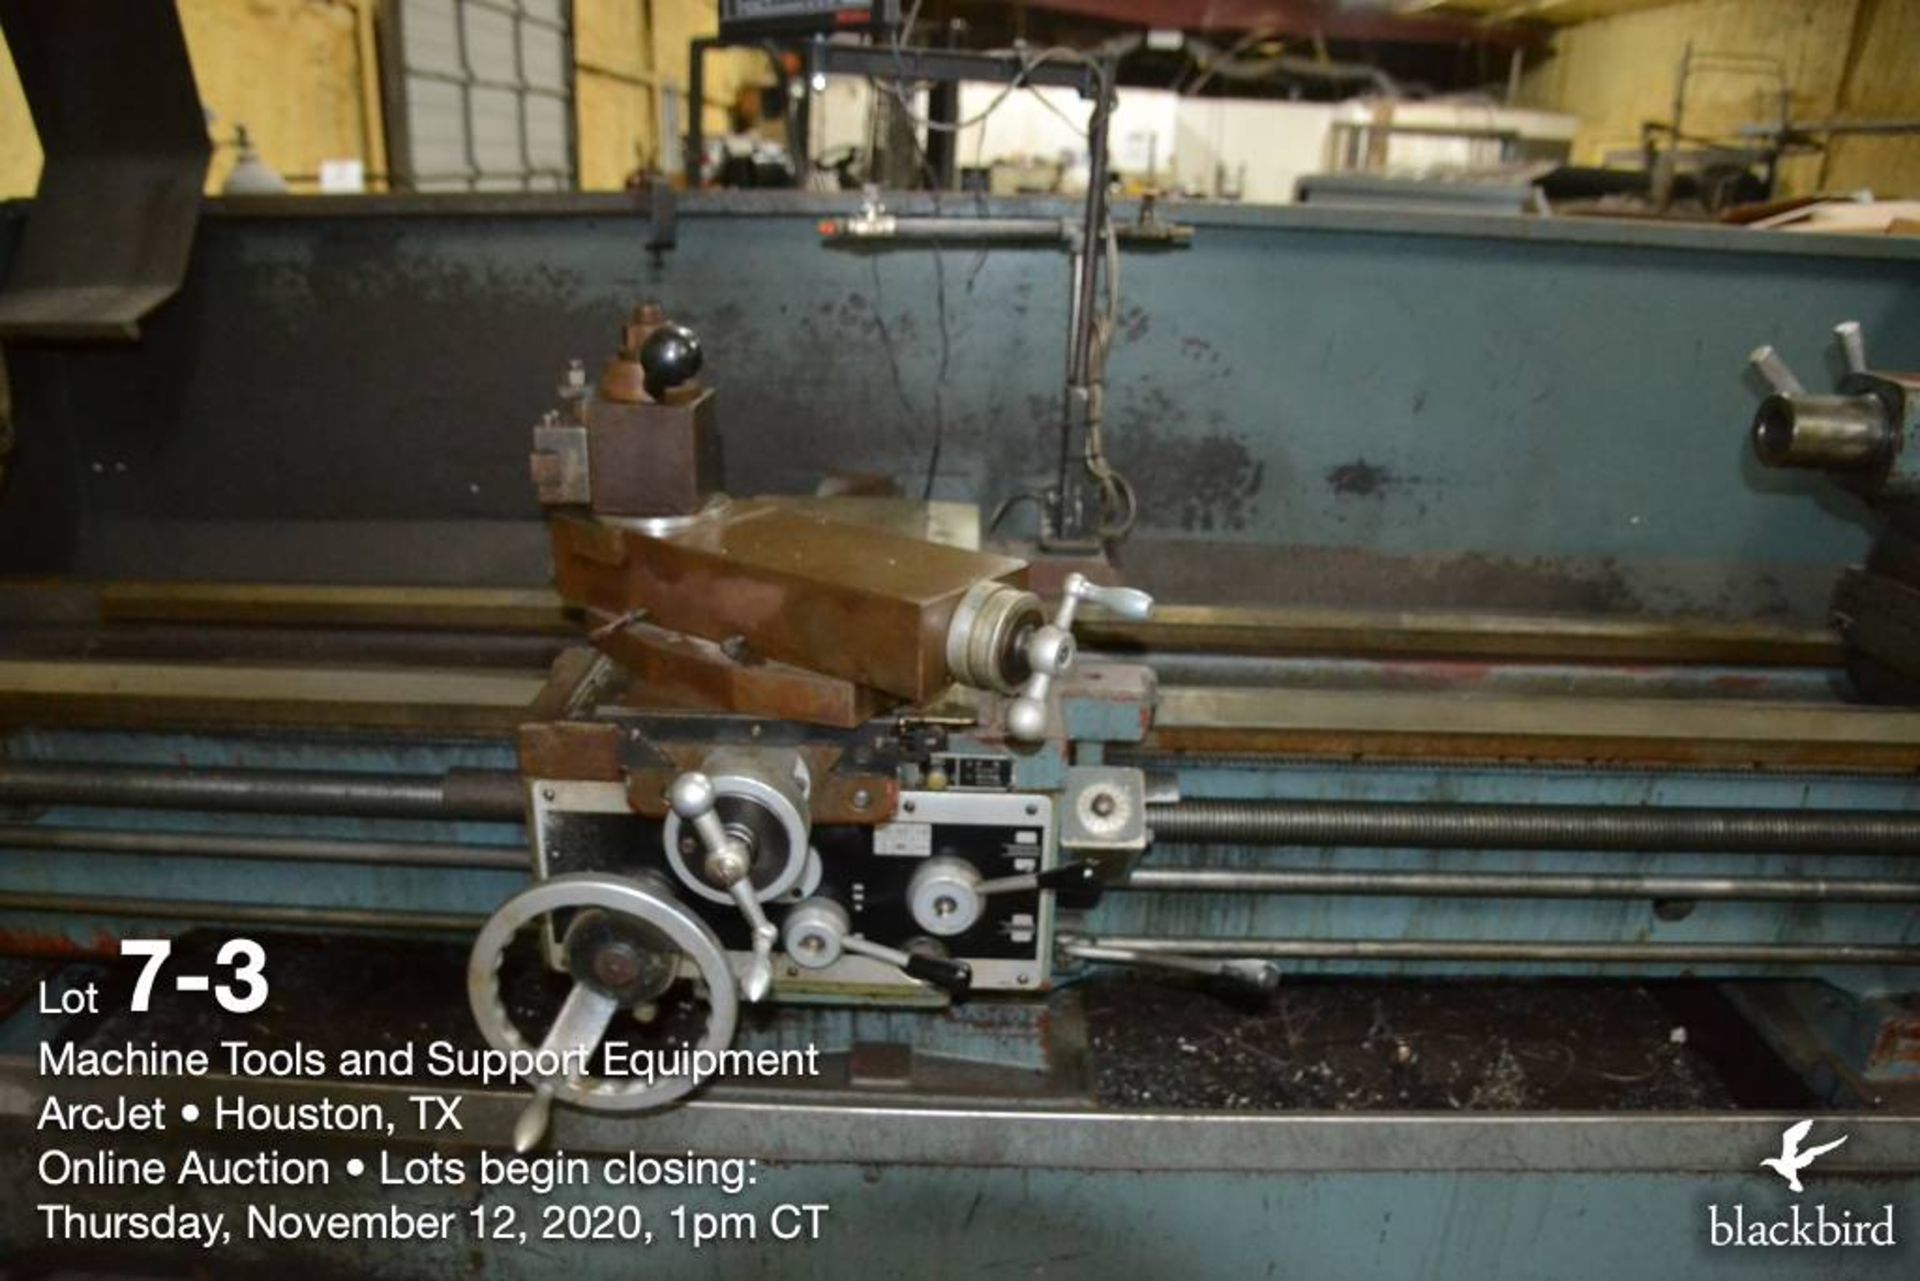 Engine lathe, Kingston HD 2290, 22 in x 90 in, metric & SAE threading, spindle bore 4 1/8 in, 2007 - Image 4 of 12